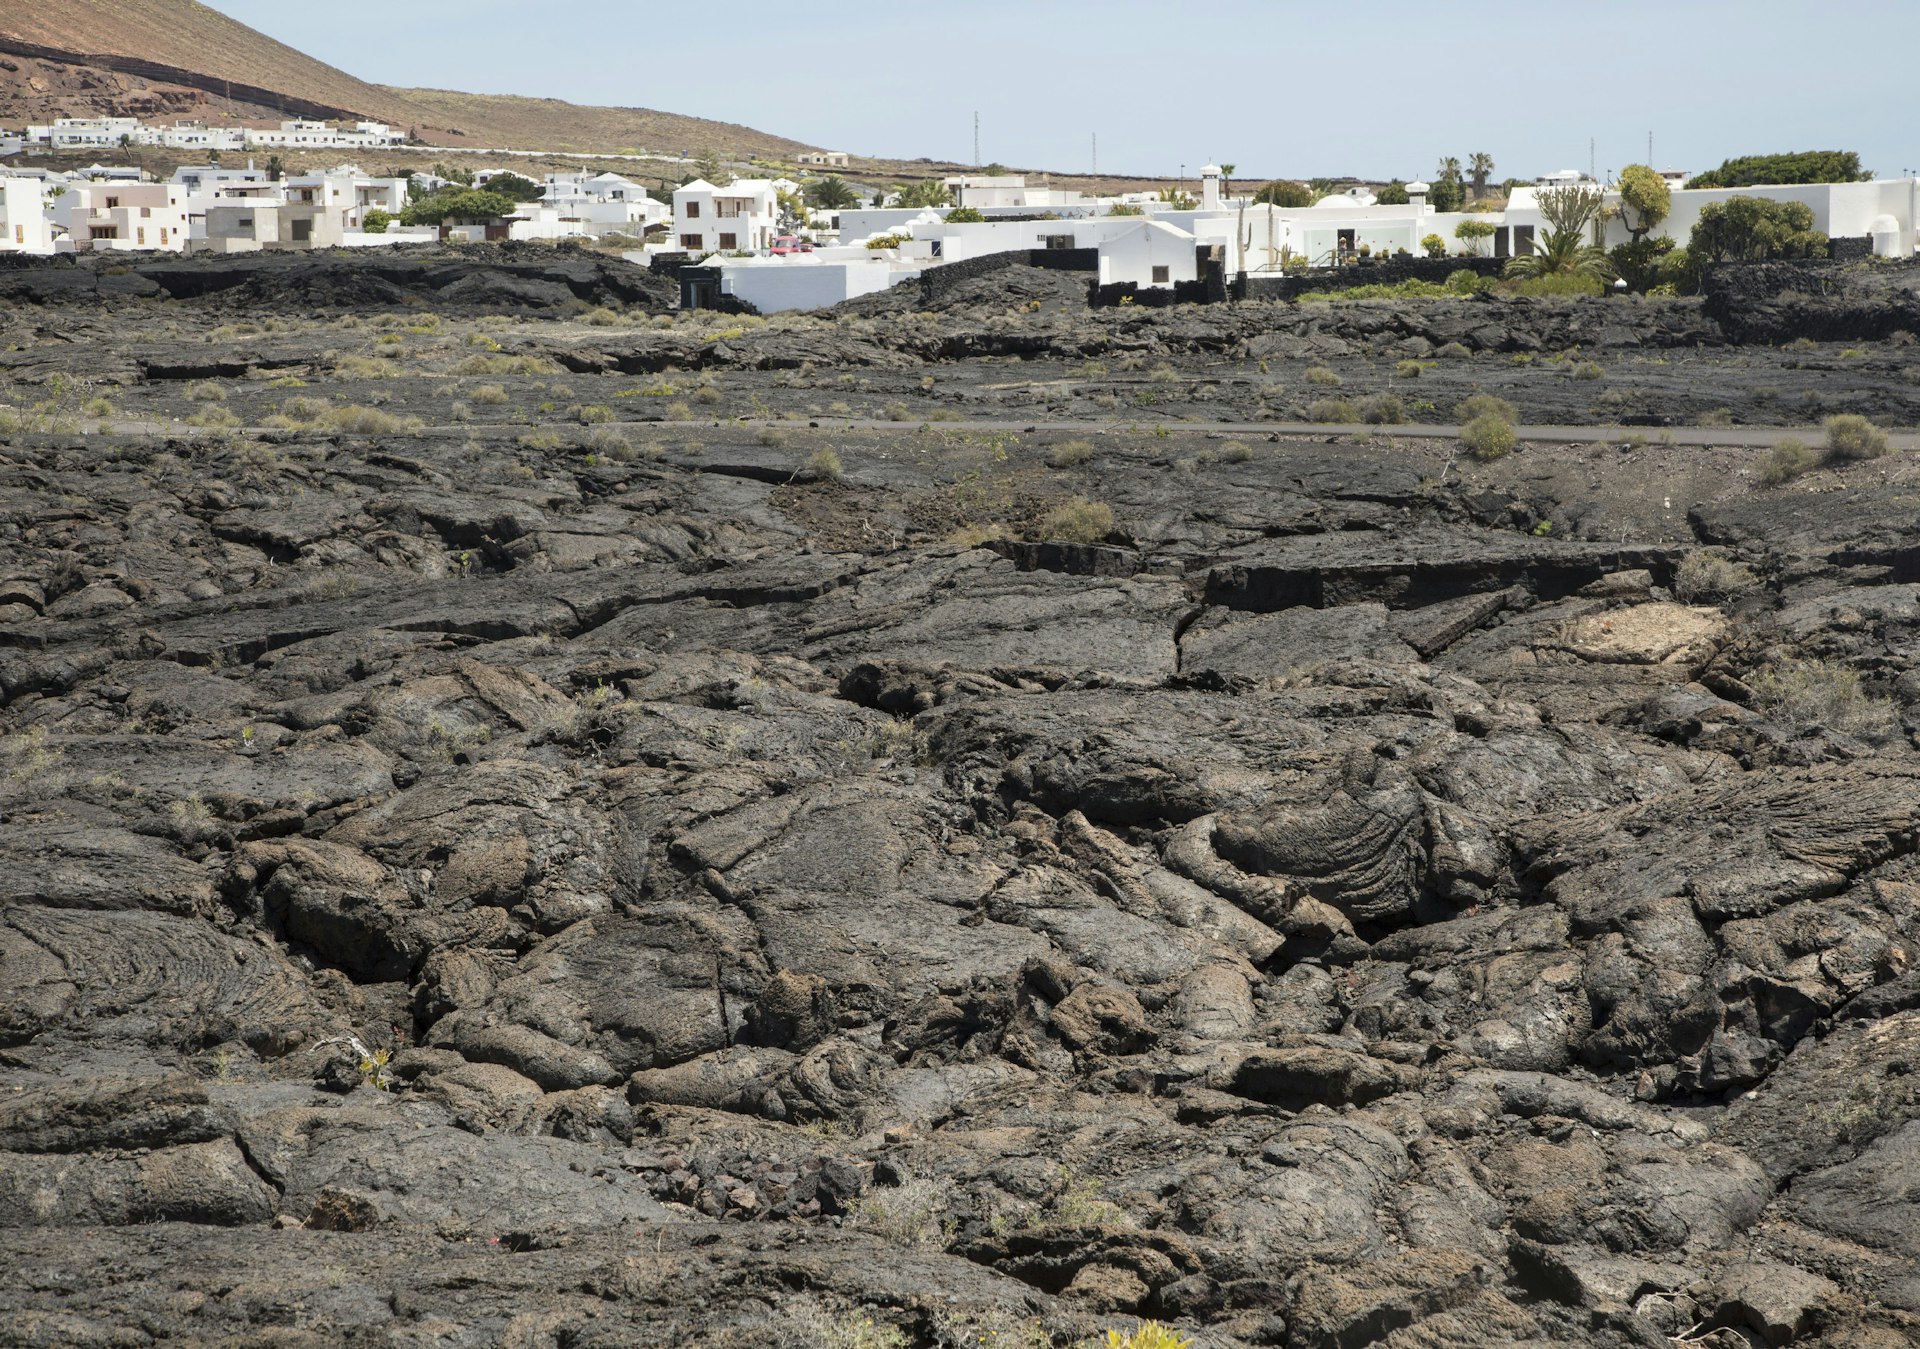 Features - Solidified pahoehoe or ropey lava field, Tahiche village, Lanzarote, Canary Islands, Spain